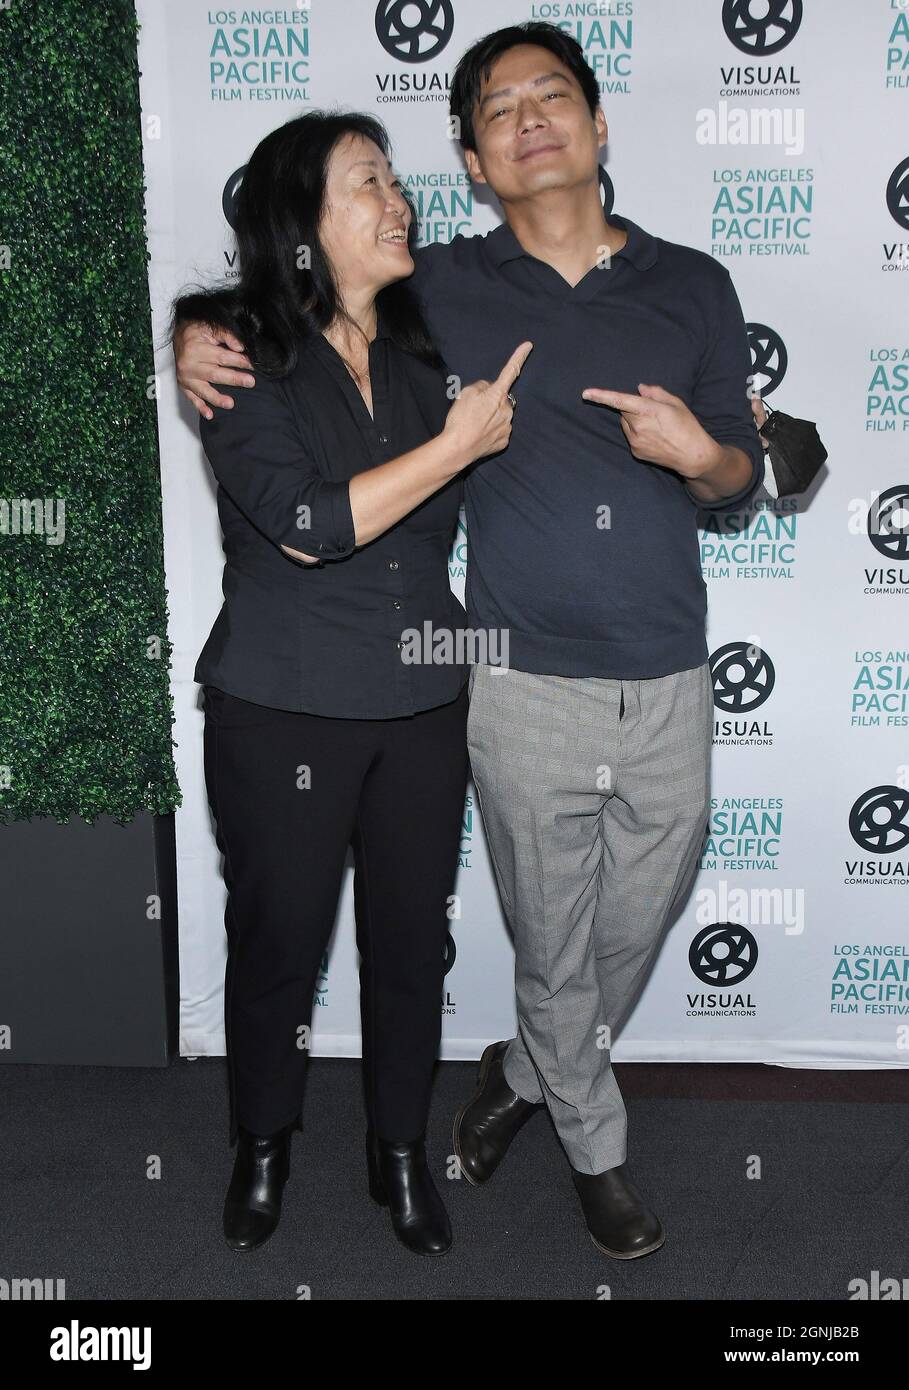 Los Angeles, USA. 25th Sep, 2021. (L-R) Director Anna Chi and Archie Kao at  the 2021 Los Angeles Asian Pacific Film Festival - THE DISAPPEARANCE OF  MRS. WU Screening held at the